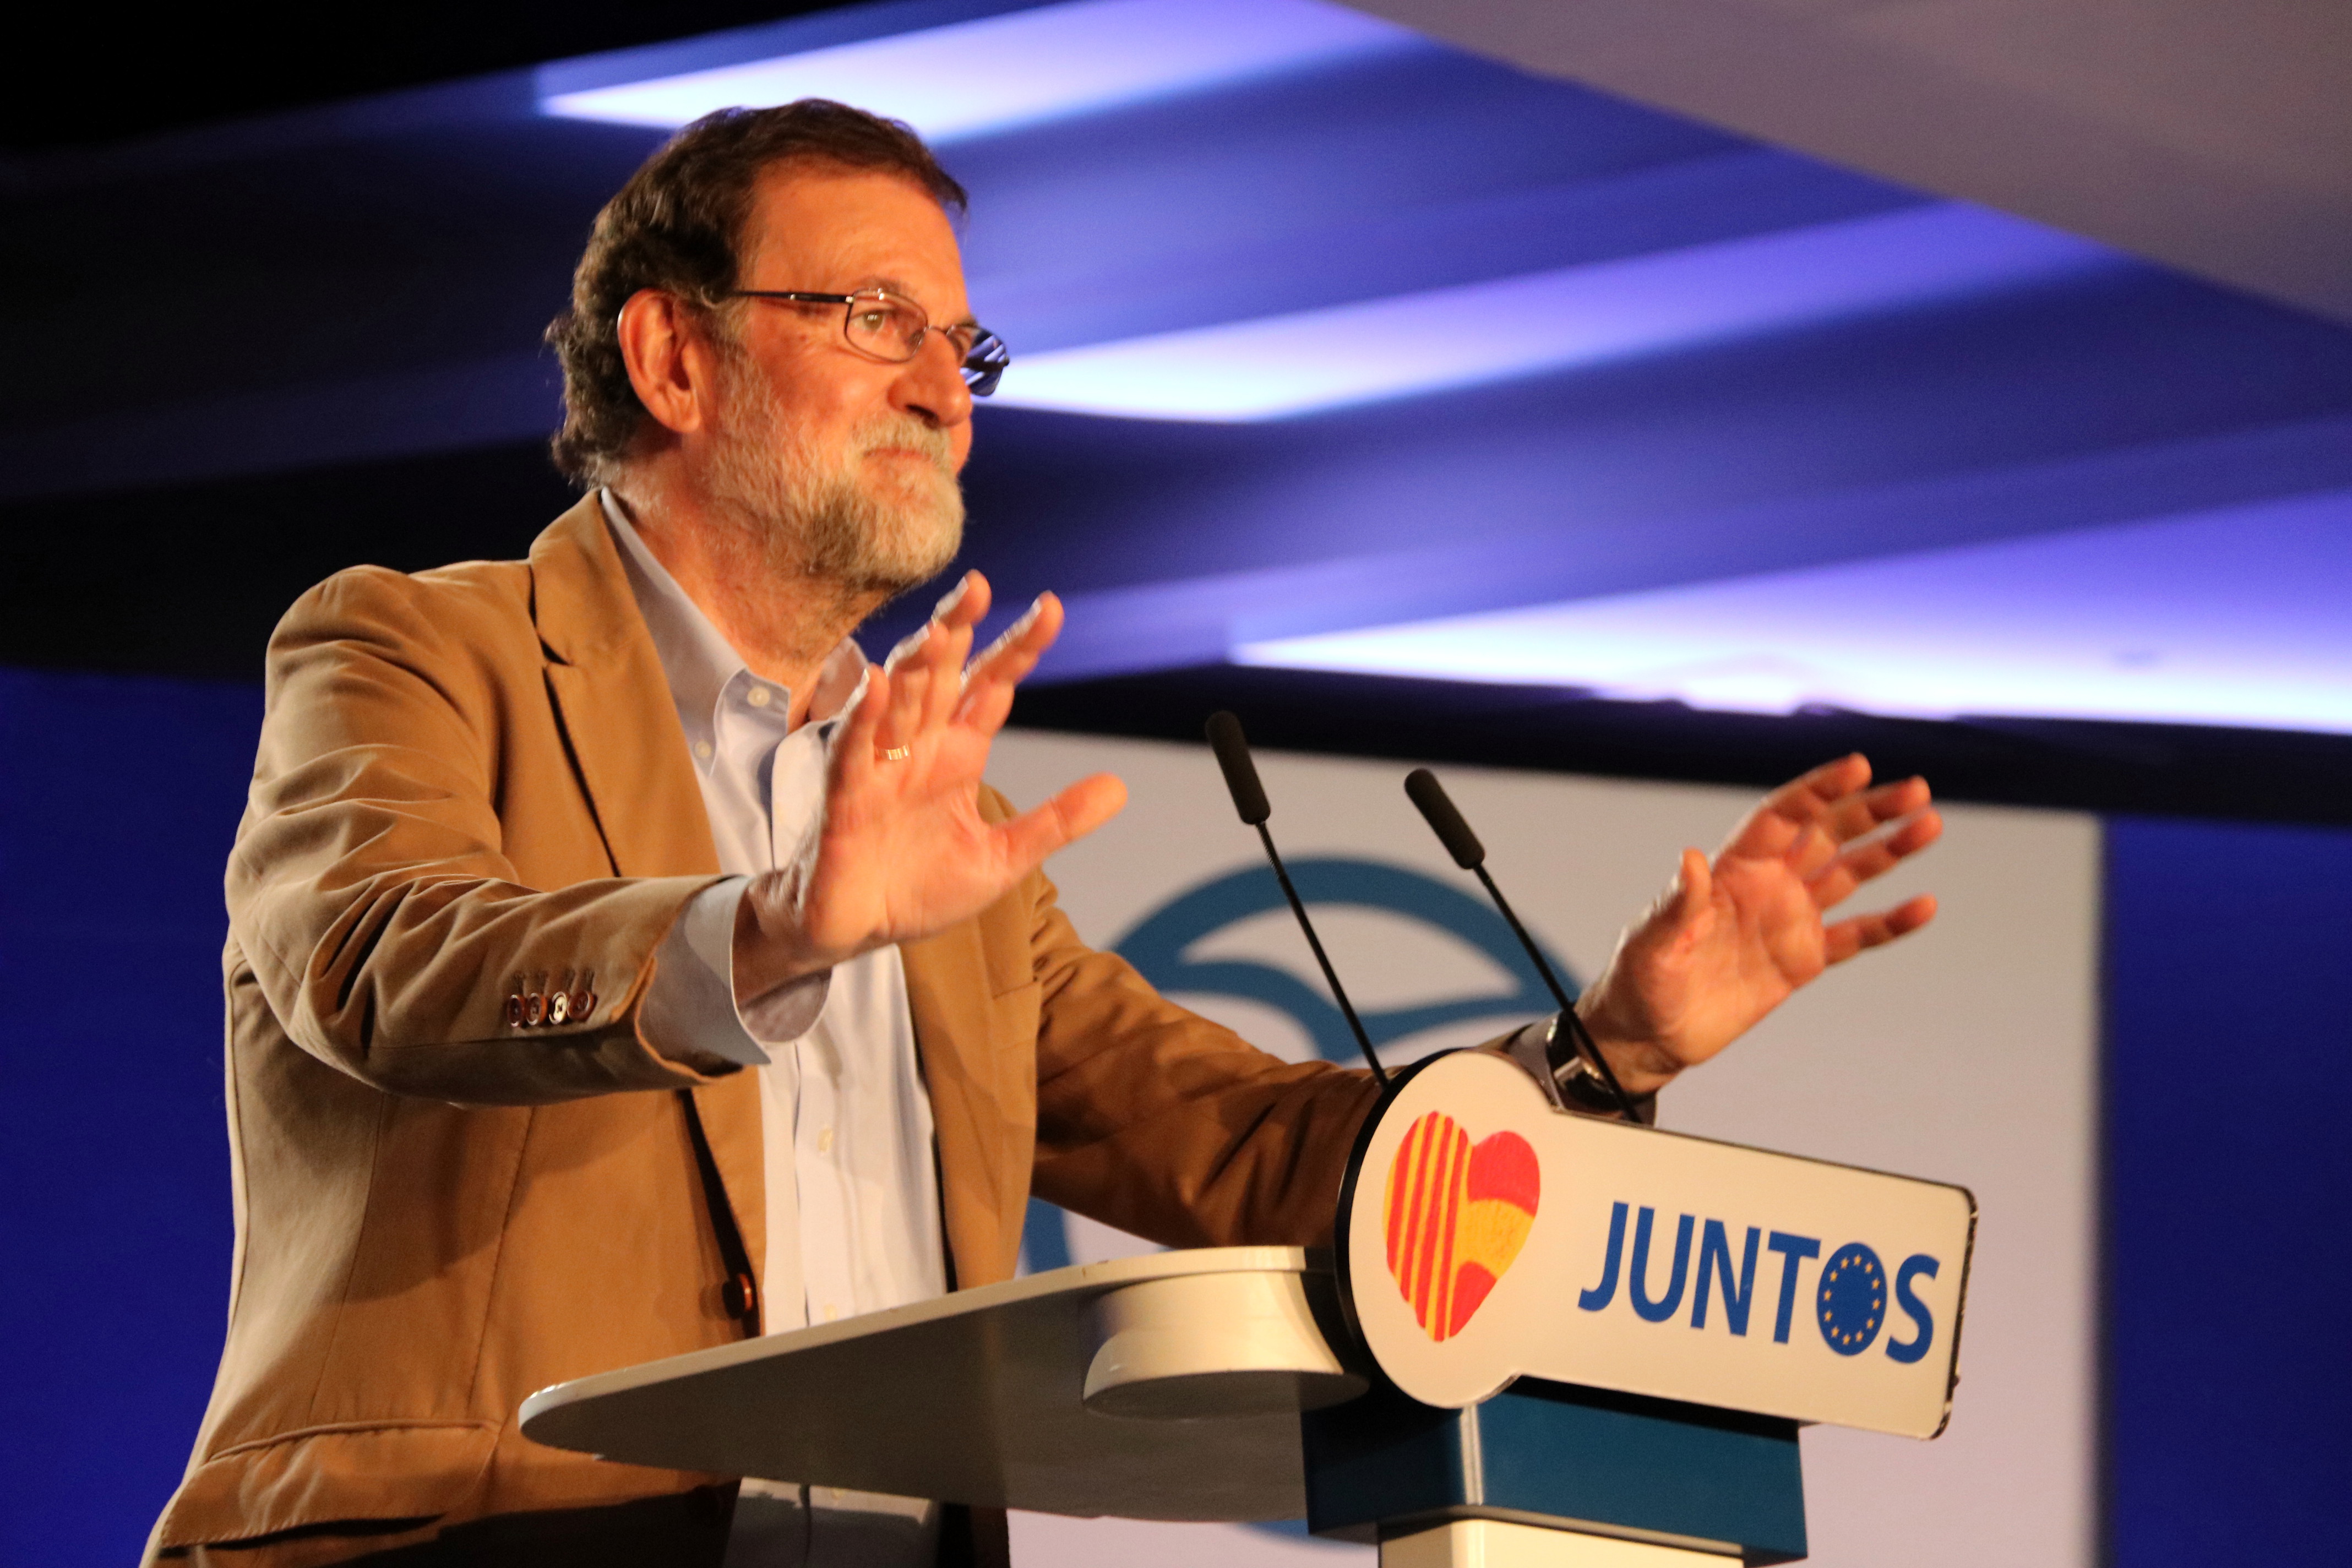 Spanish president Mariano Rajoy at the pre-campaign inaugural event in Barcelona on November 12 (by ACN)